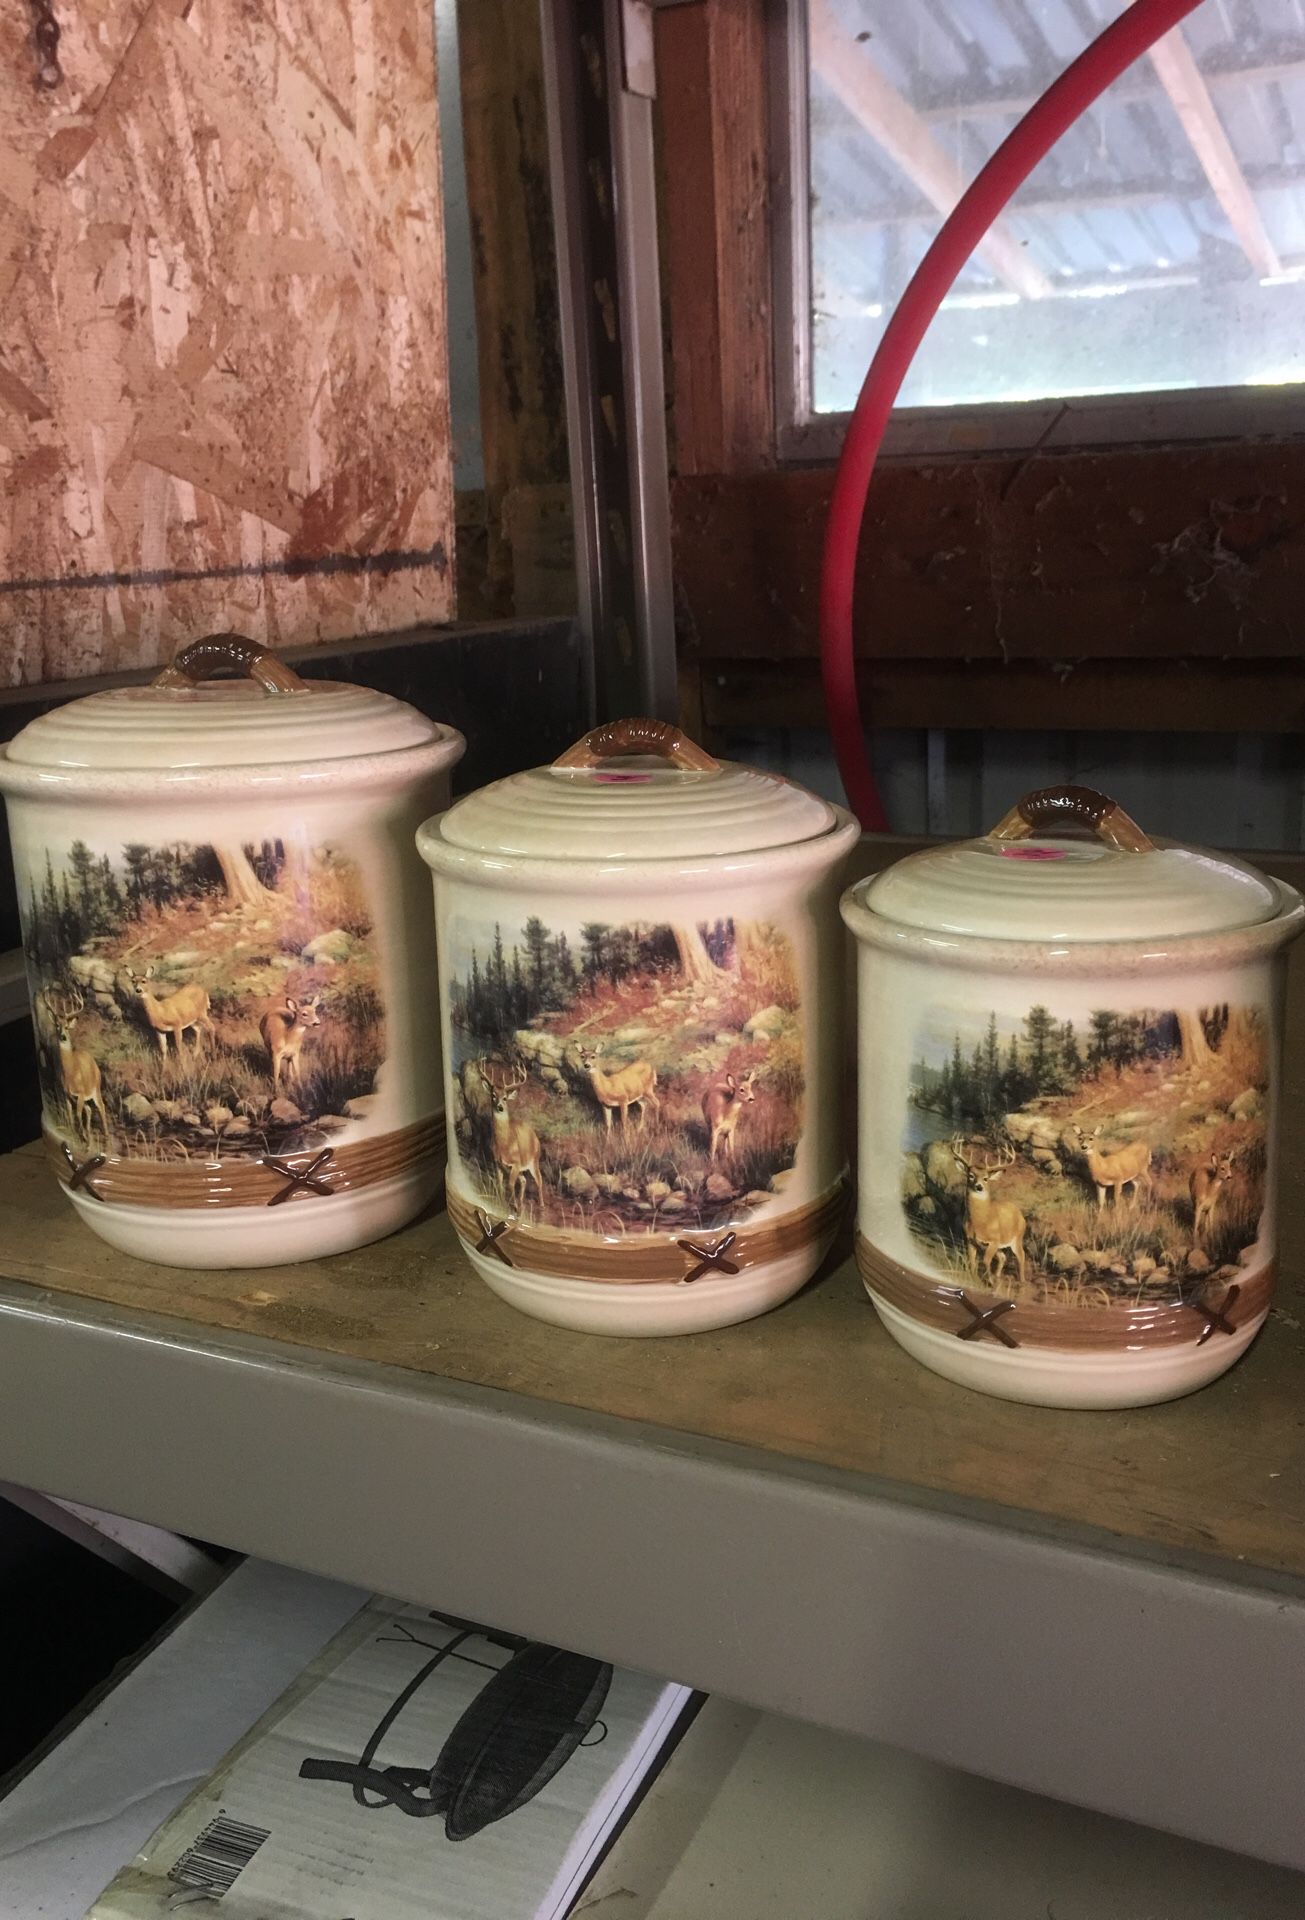 Deer canisters